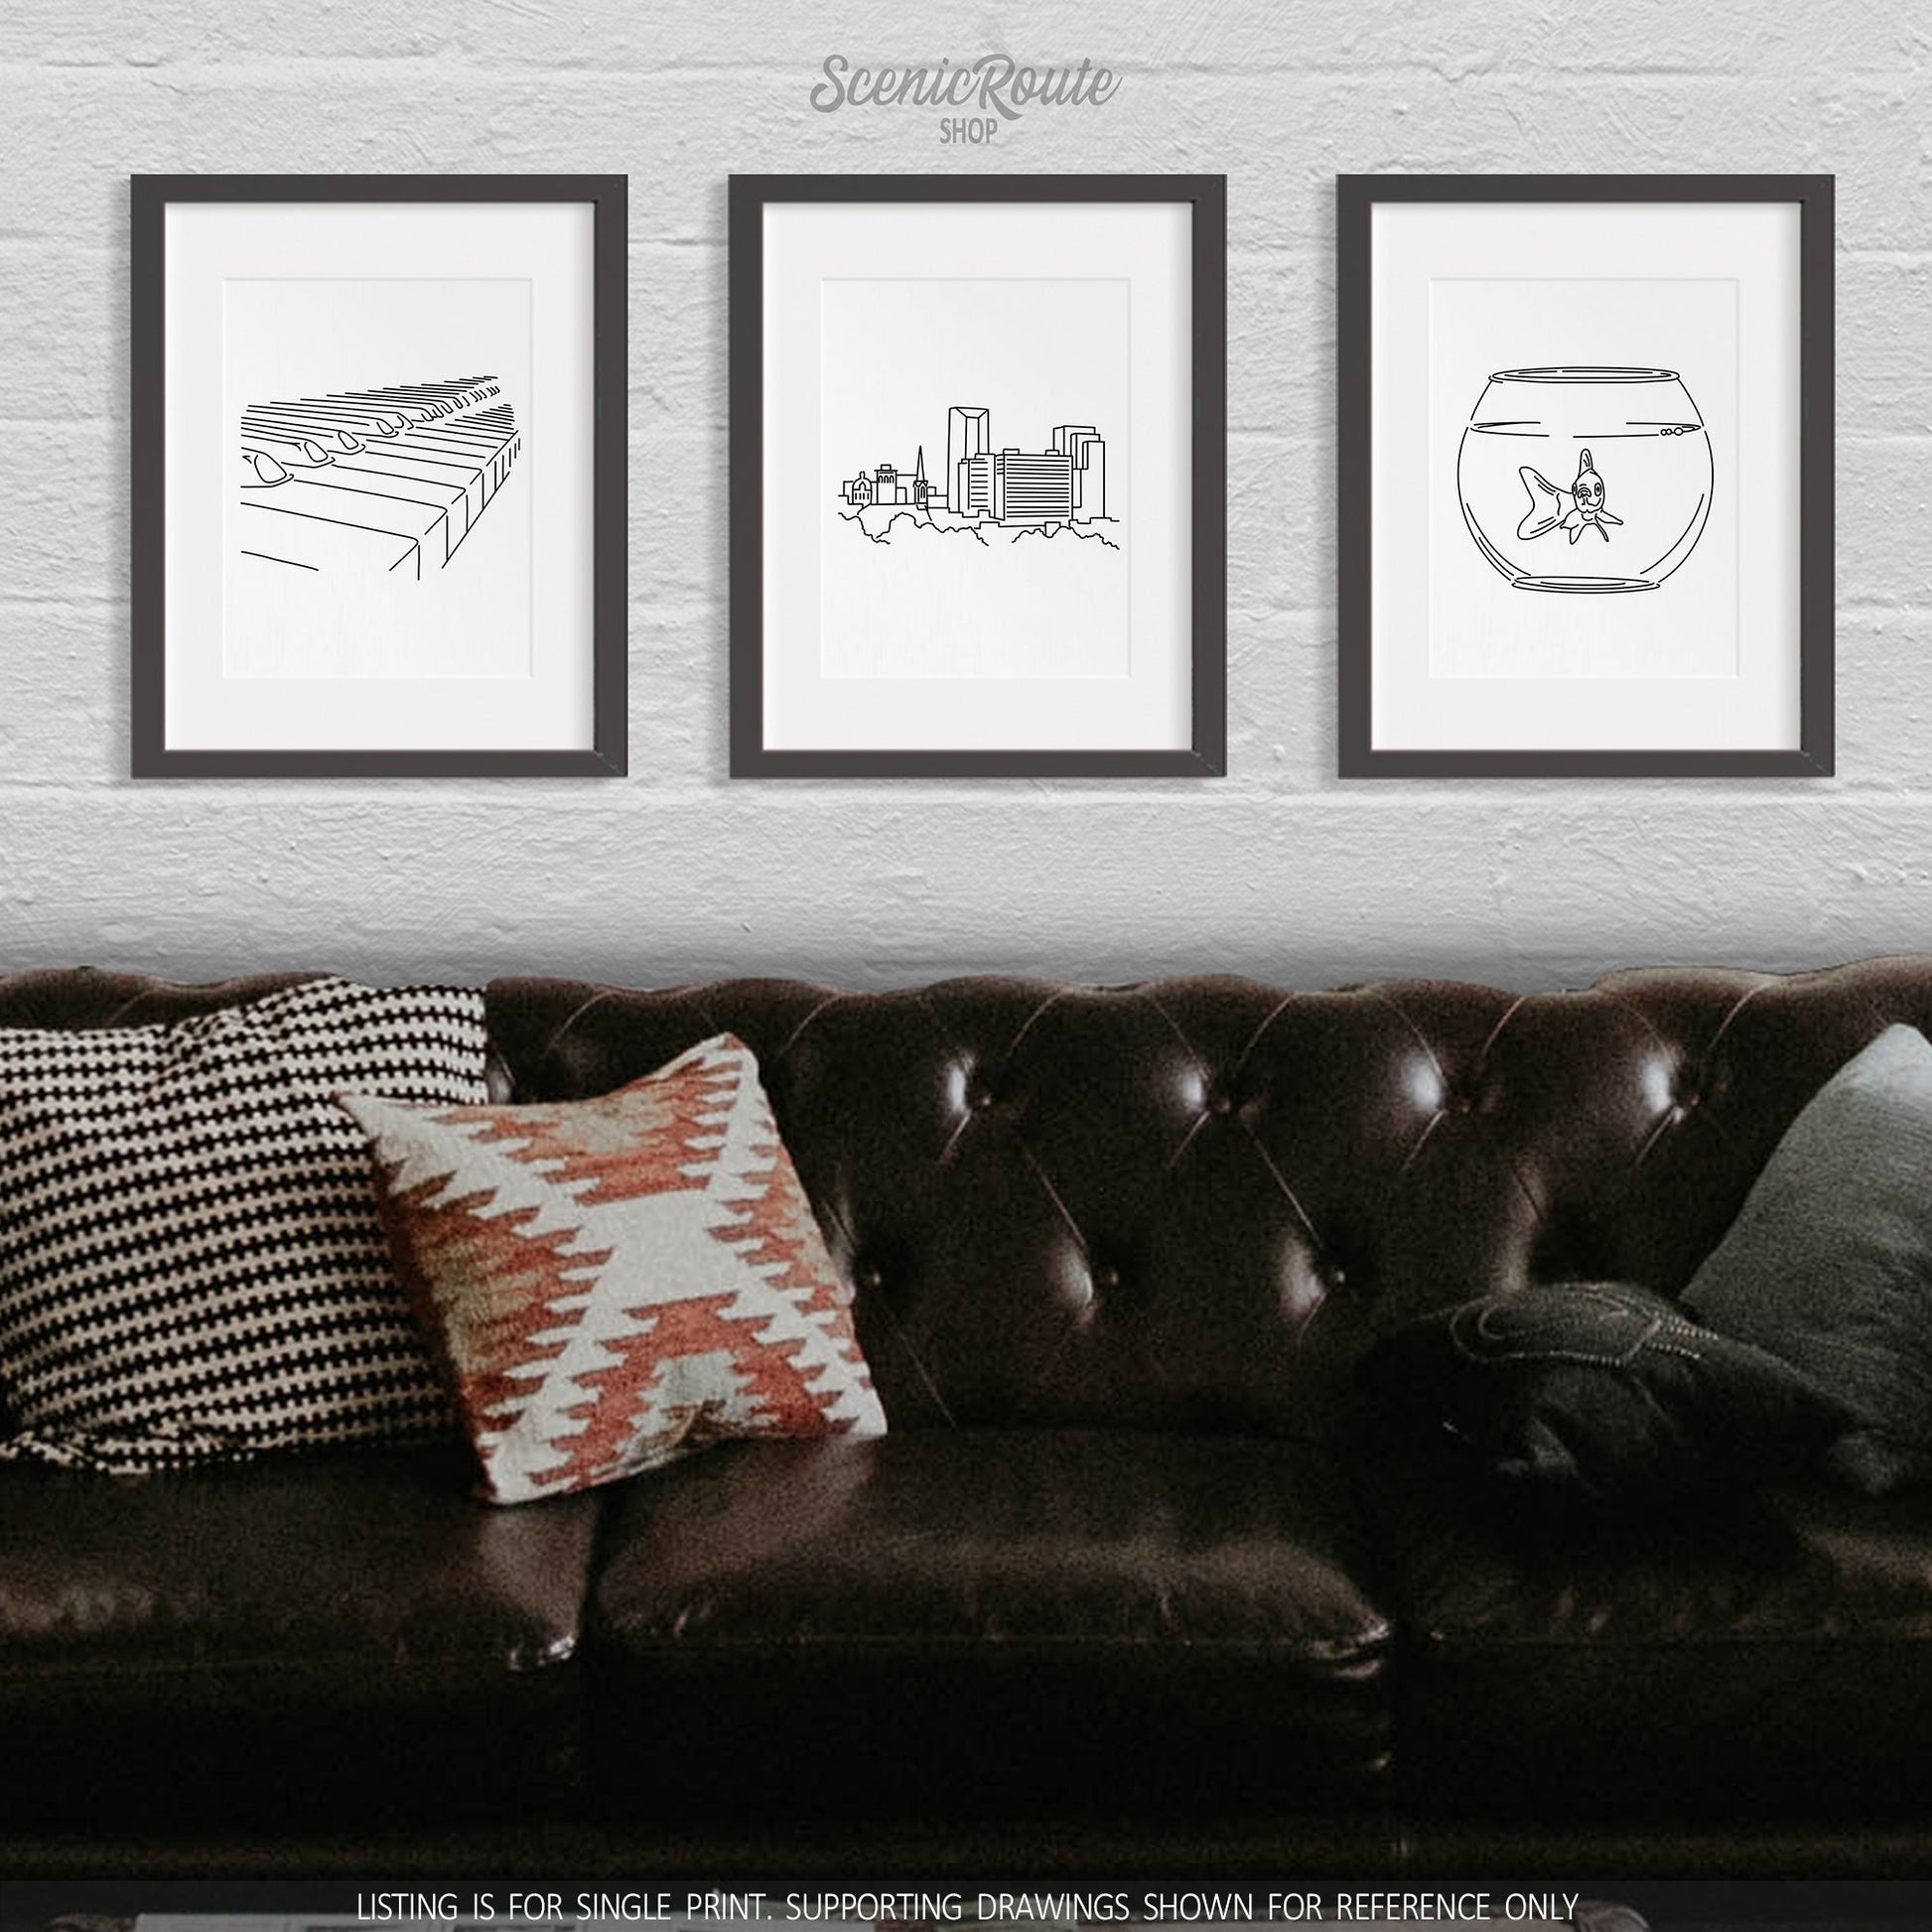 A group of three framed drawings on a wall above a couch. The line art drawings include a Piano, Lexington Skyline, and Goldfish